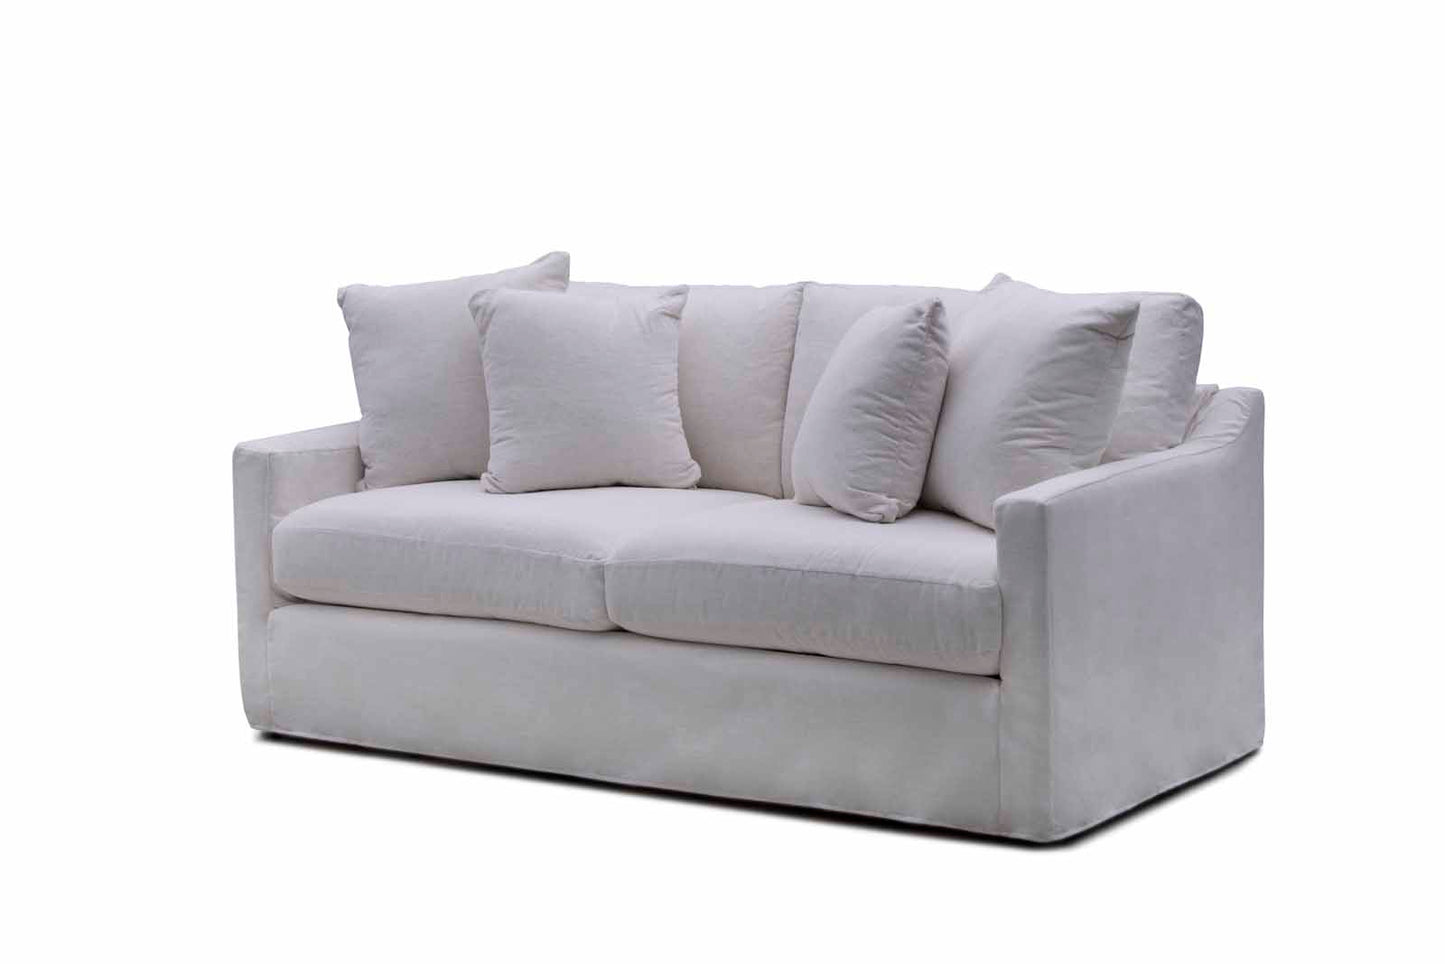 Reese Queen Sleeper Sofa in Nomad Snow Fabric